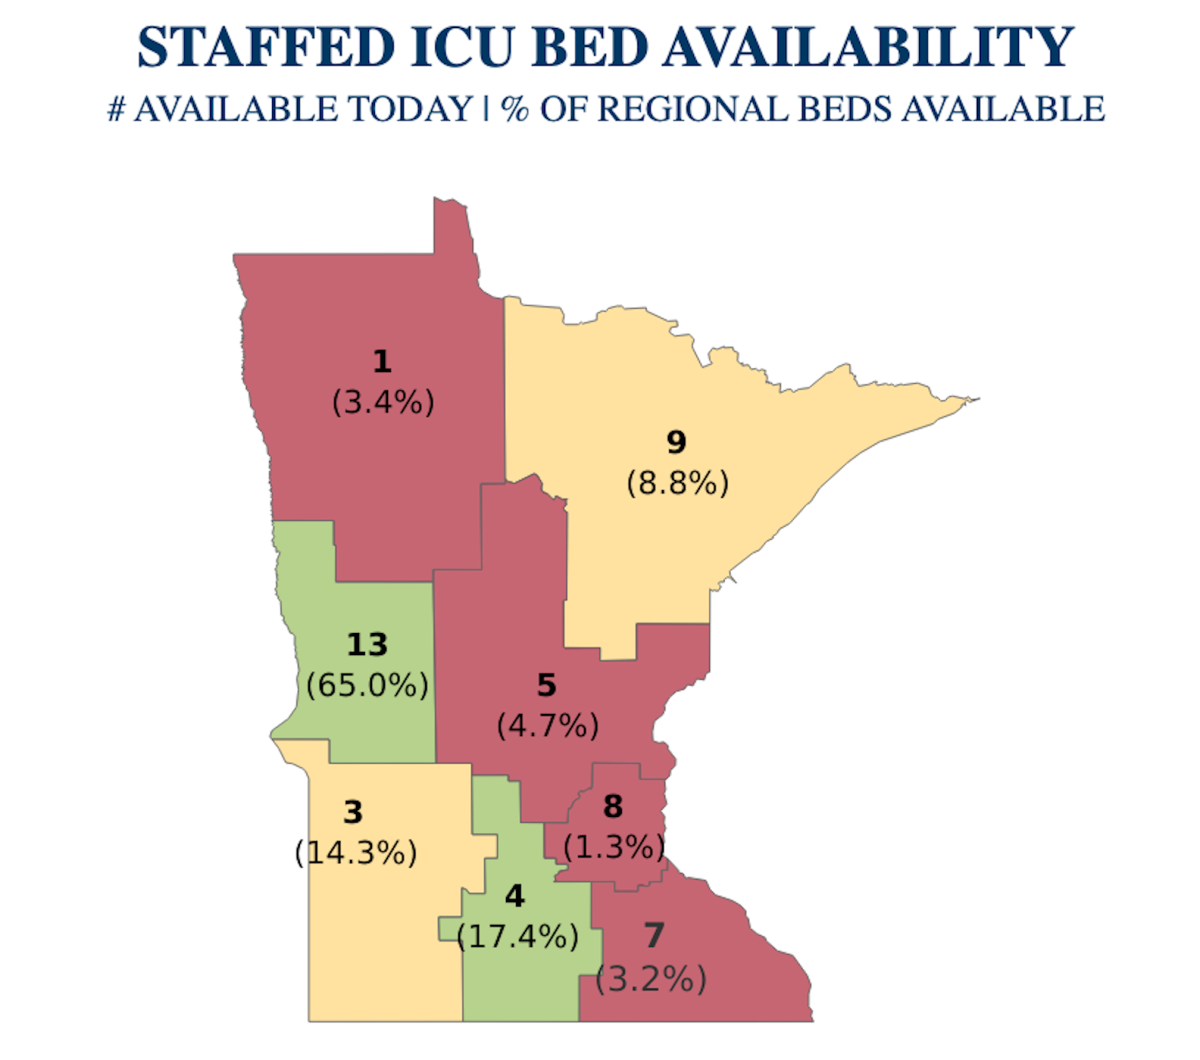 Monday's data from the health department shows that only 50 staffed ICU beds are available across the entire state. 